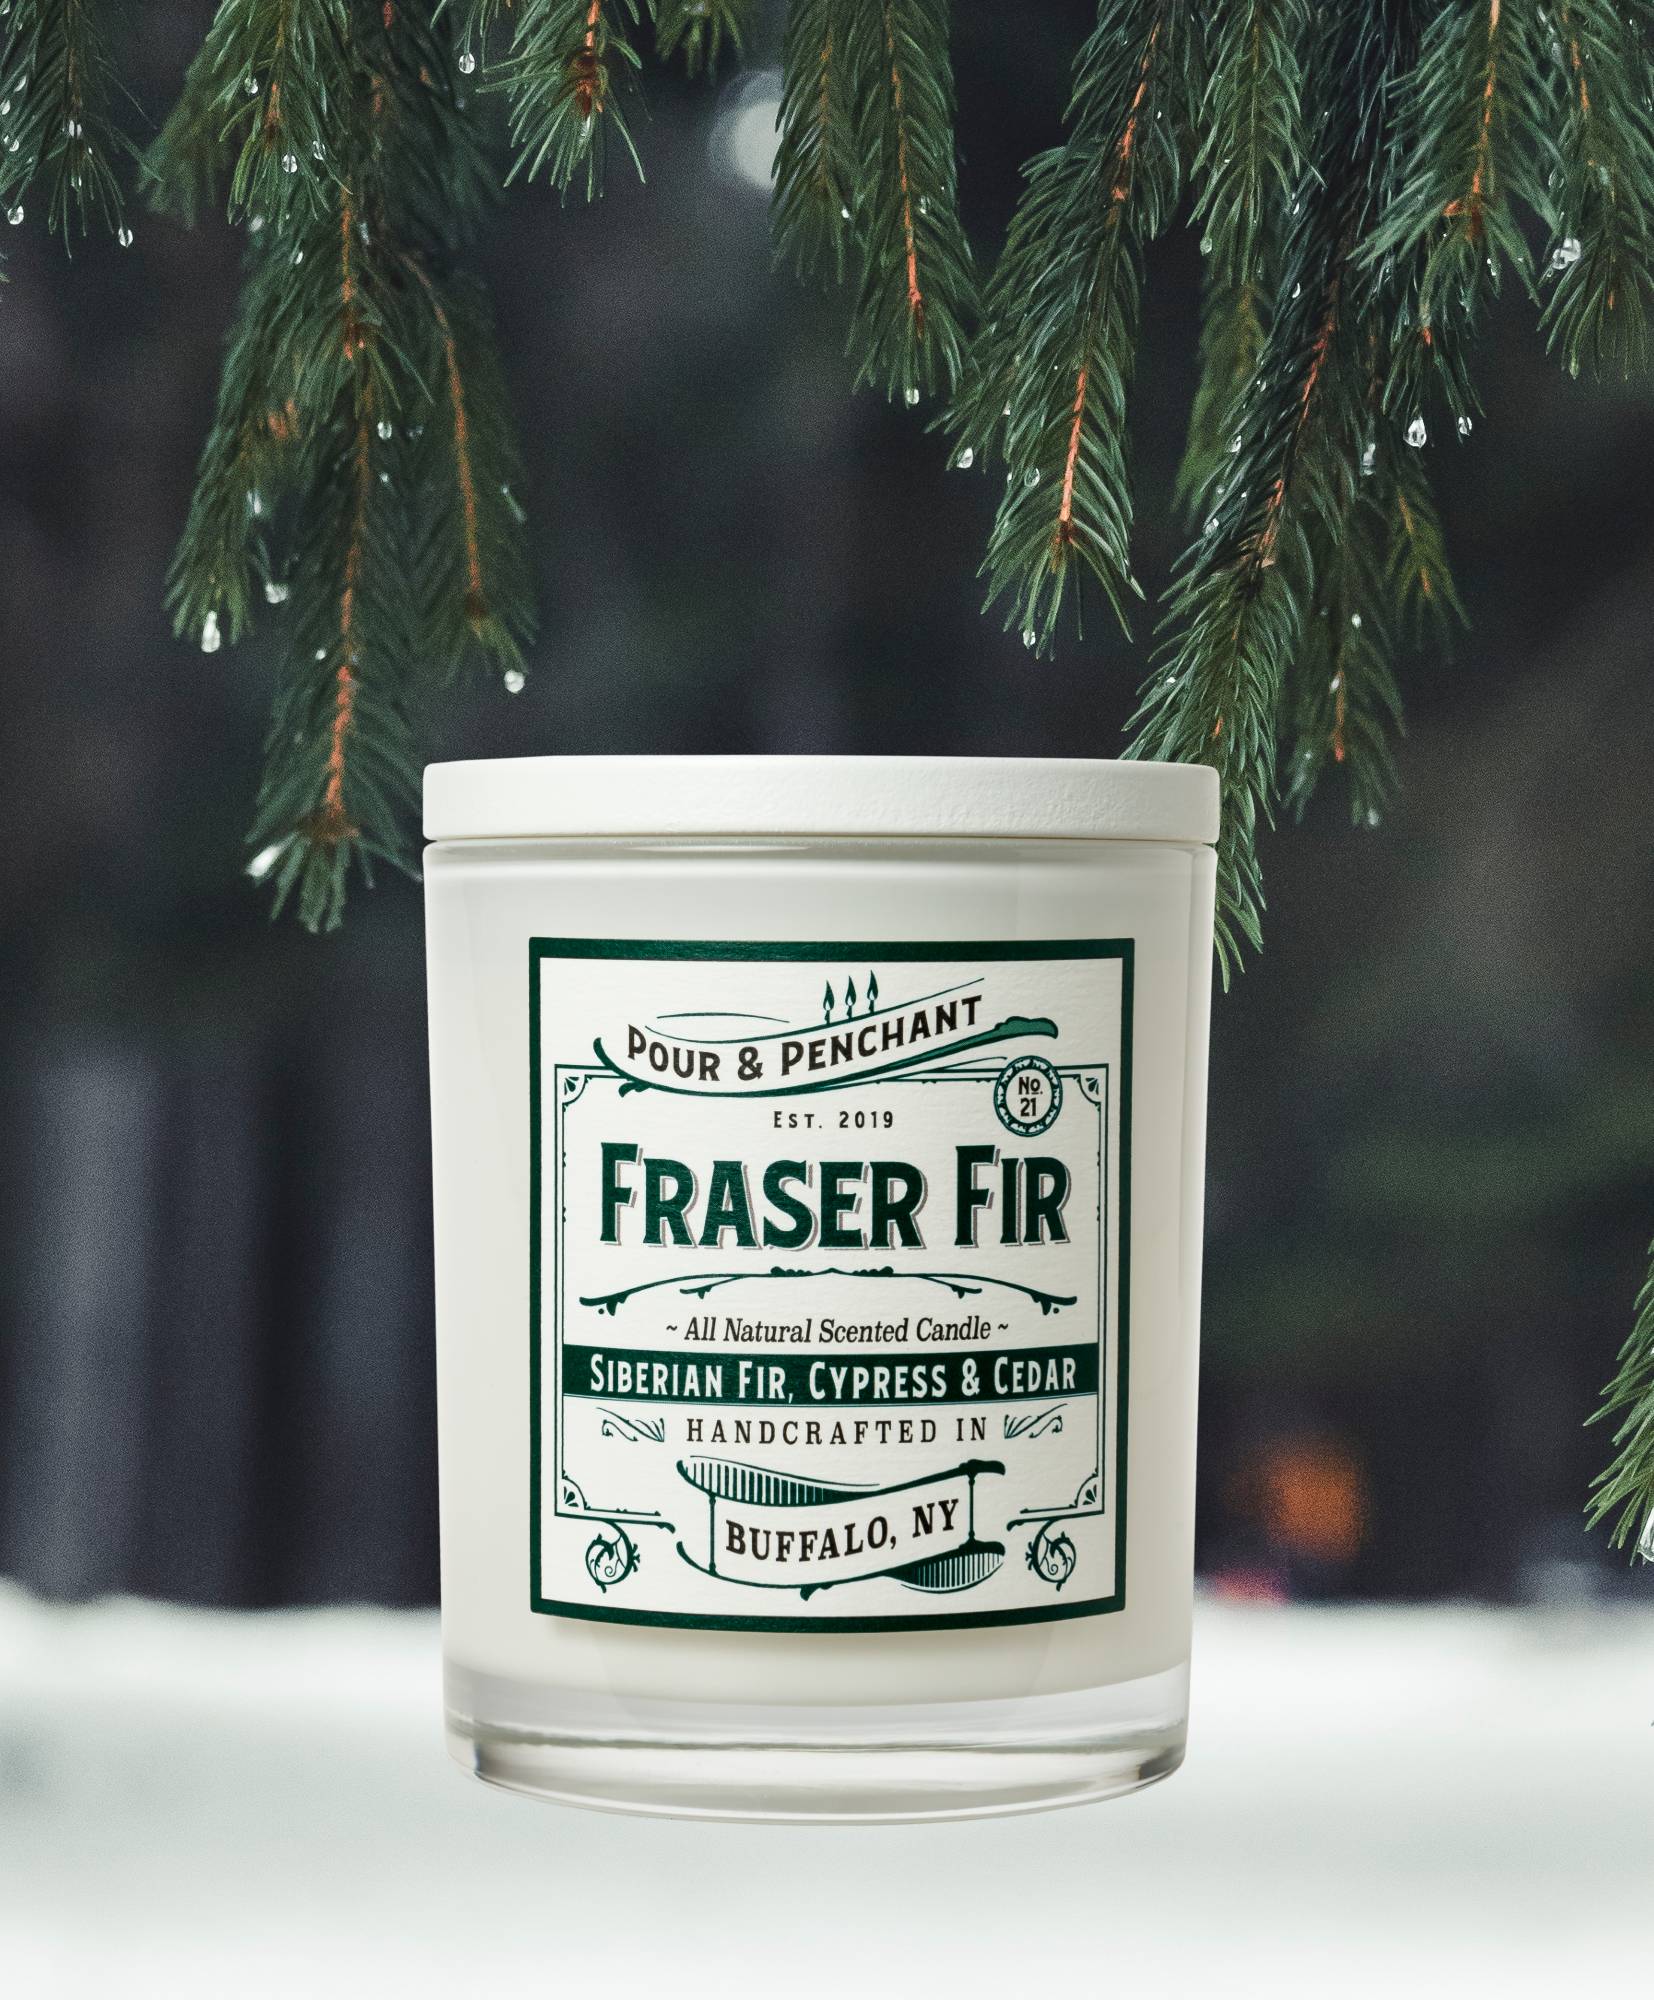 image of pour & penchant's bestselling holiday candle, fraser fir, set against a snowy background with pine needles